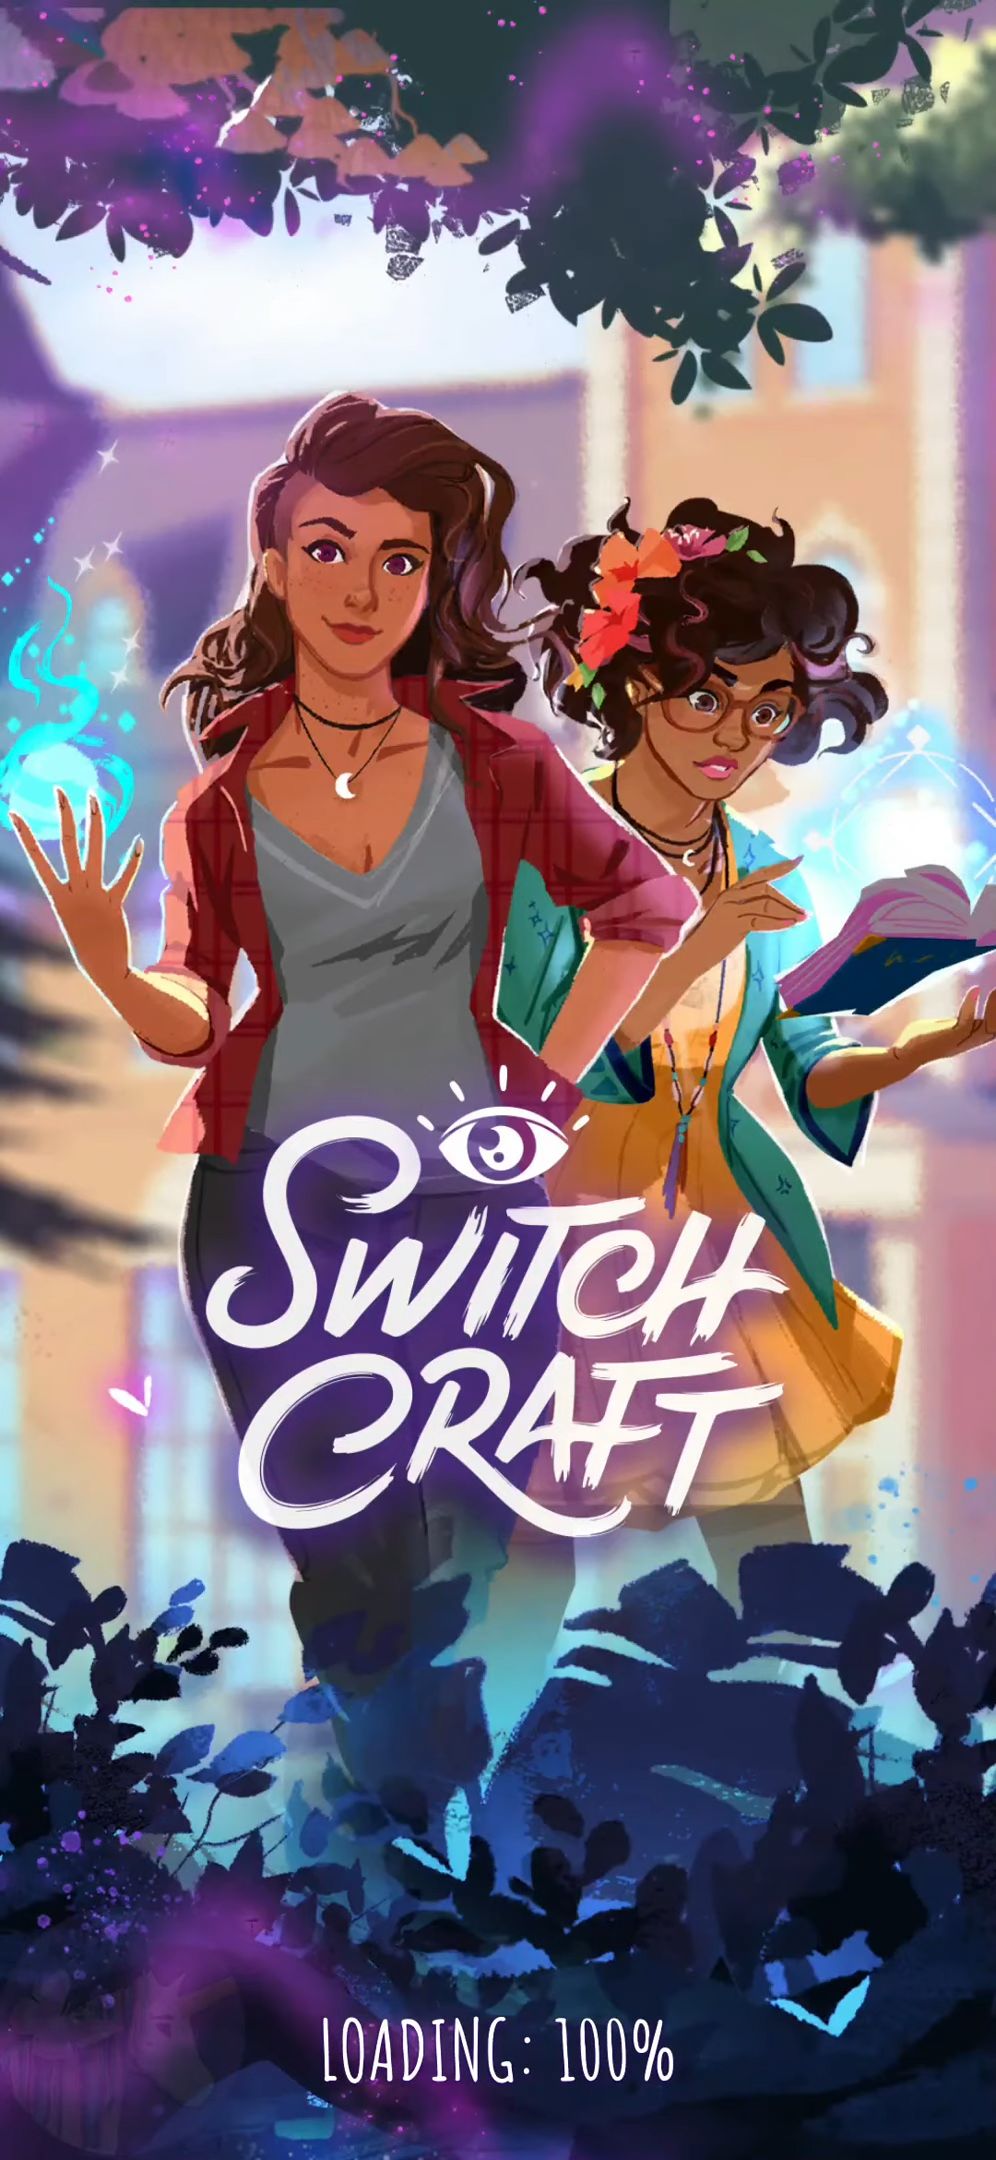 Scarica Switchcraft: Magical Match 3 gratis per Android.